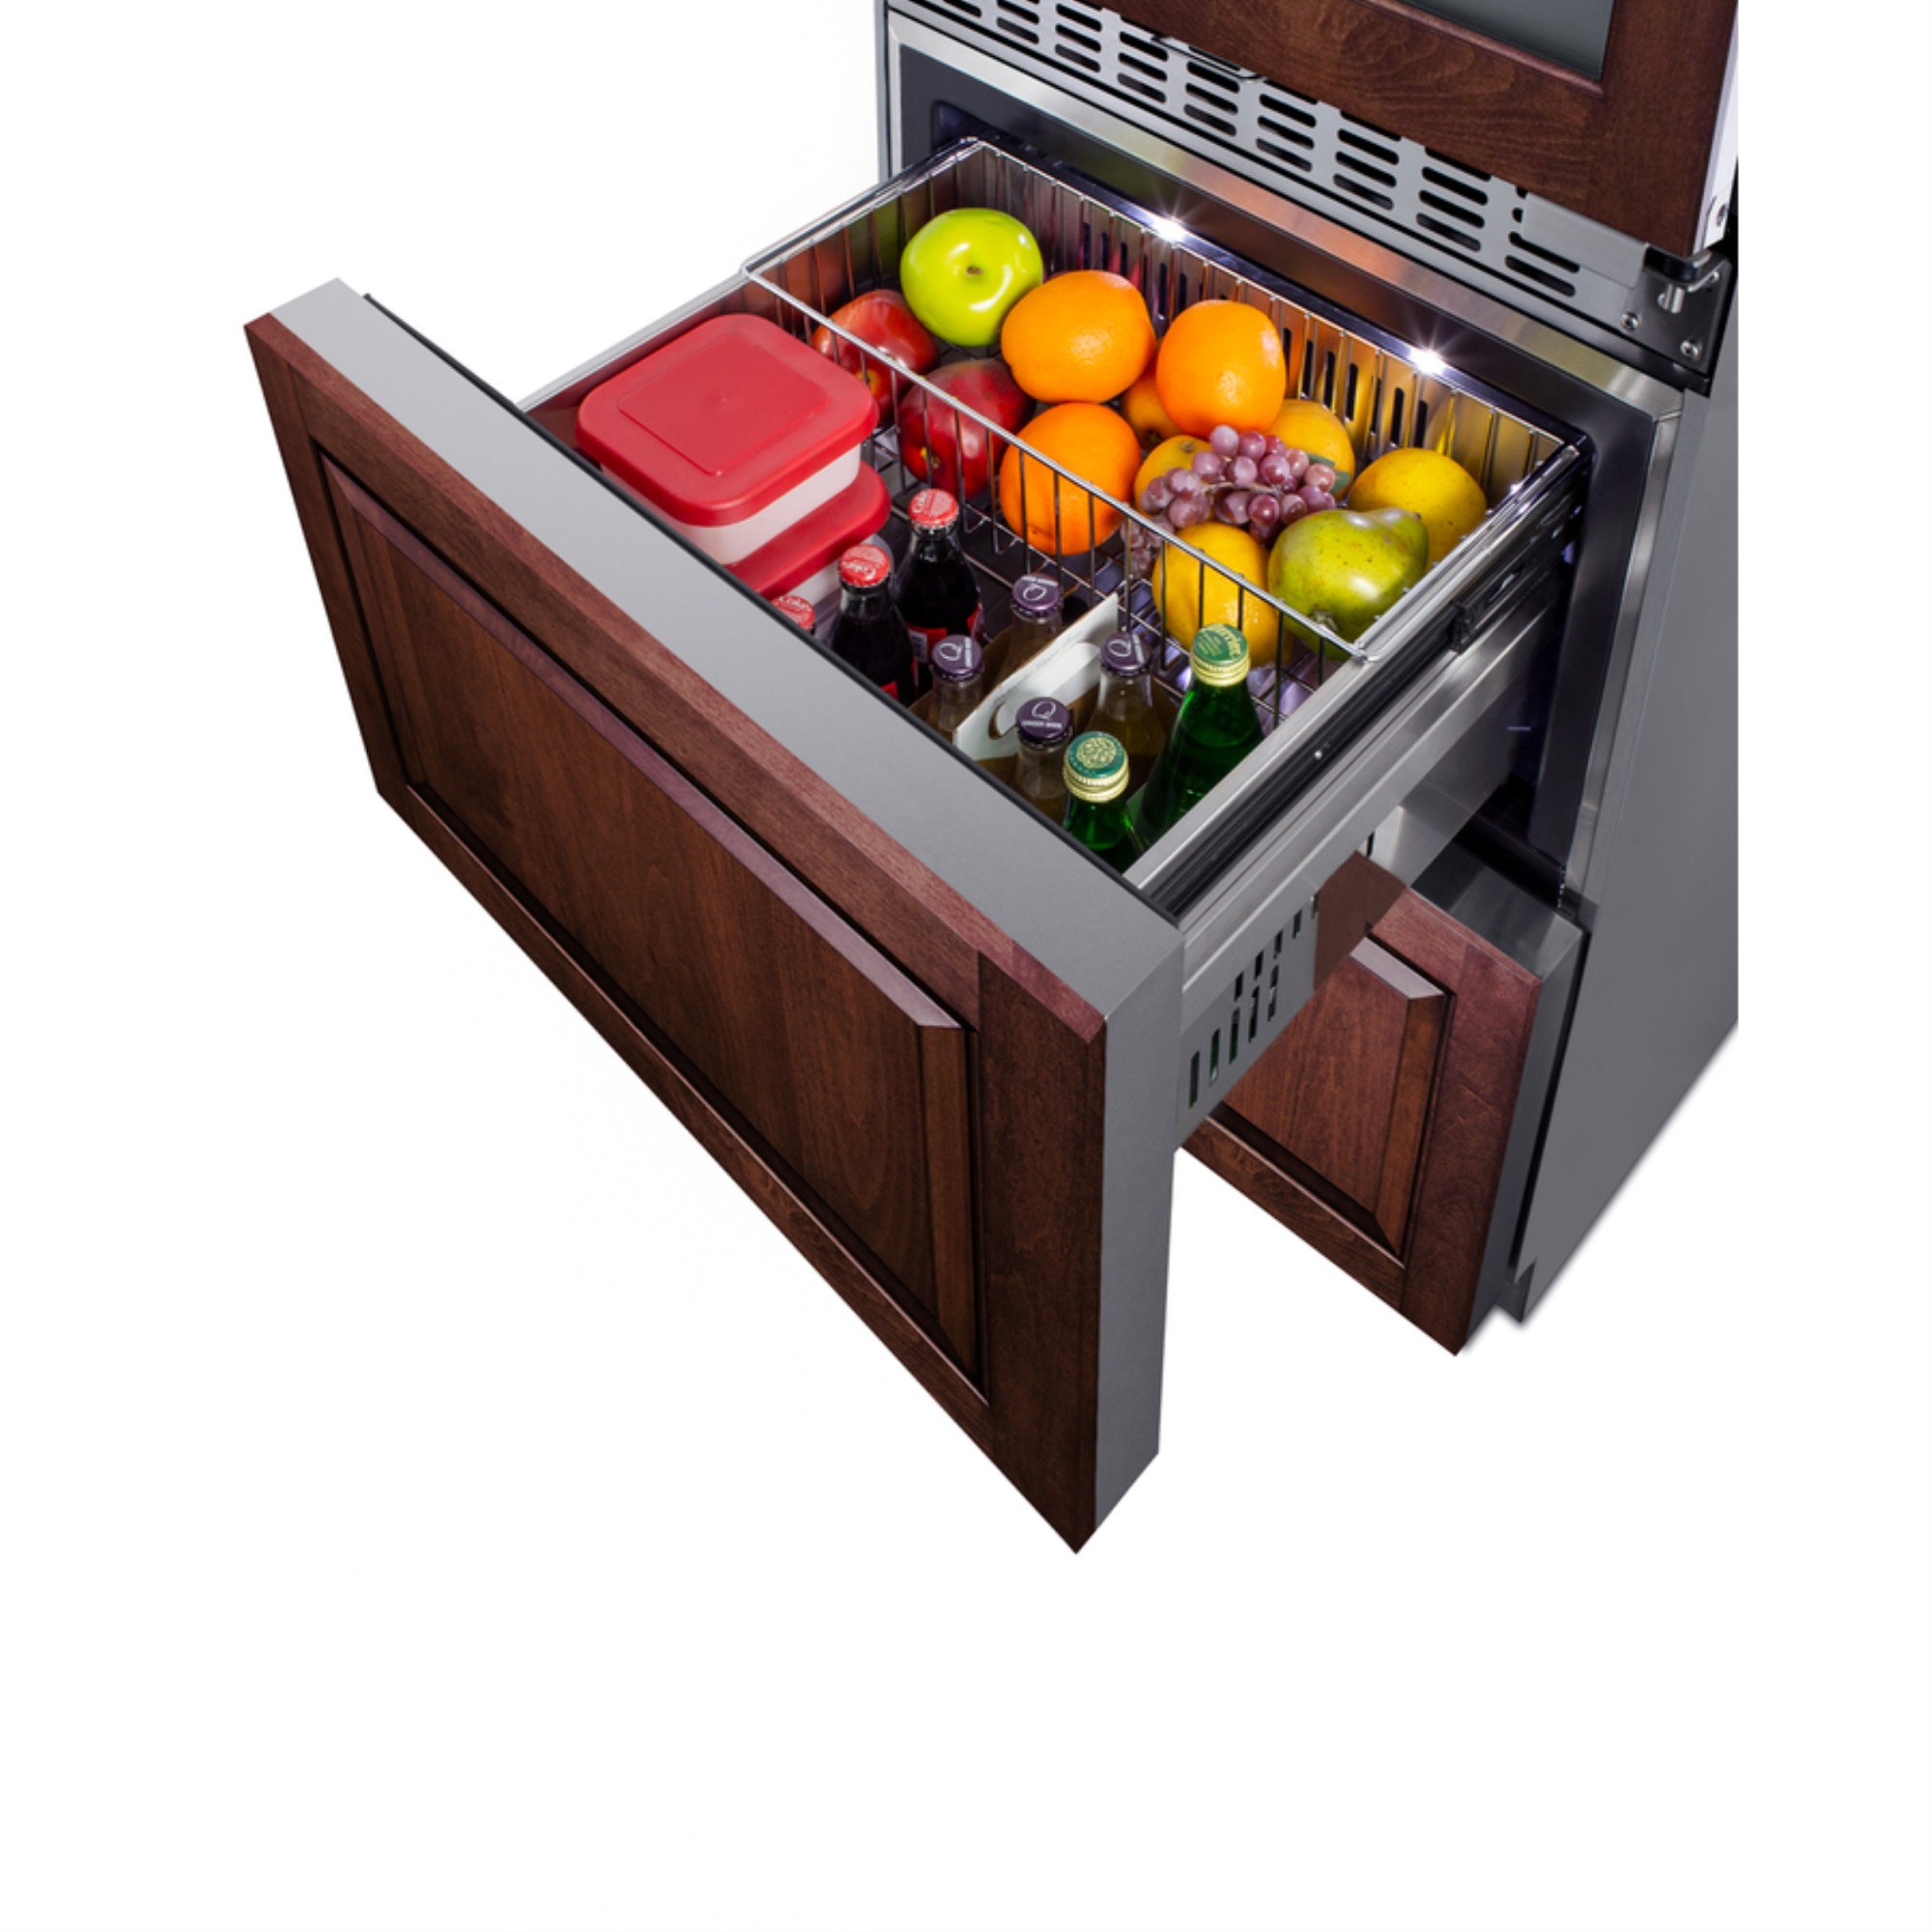 Summit 24" wide combination built-in/freestanding upright dual zone wine cellar and 2-drawer refrigerator, panel-ready front